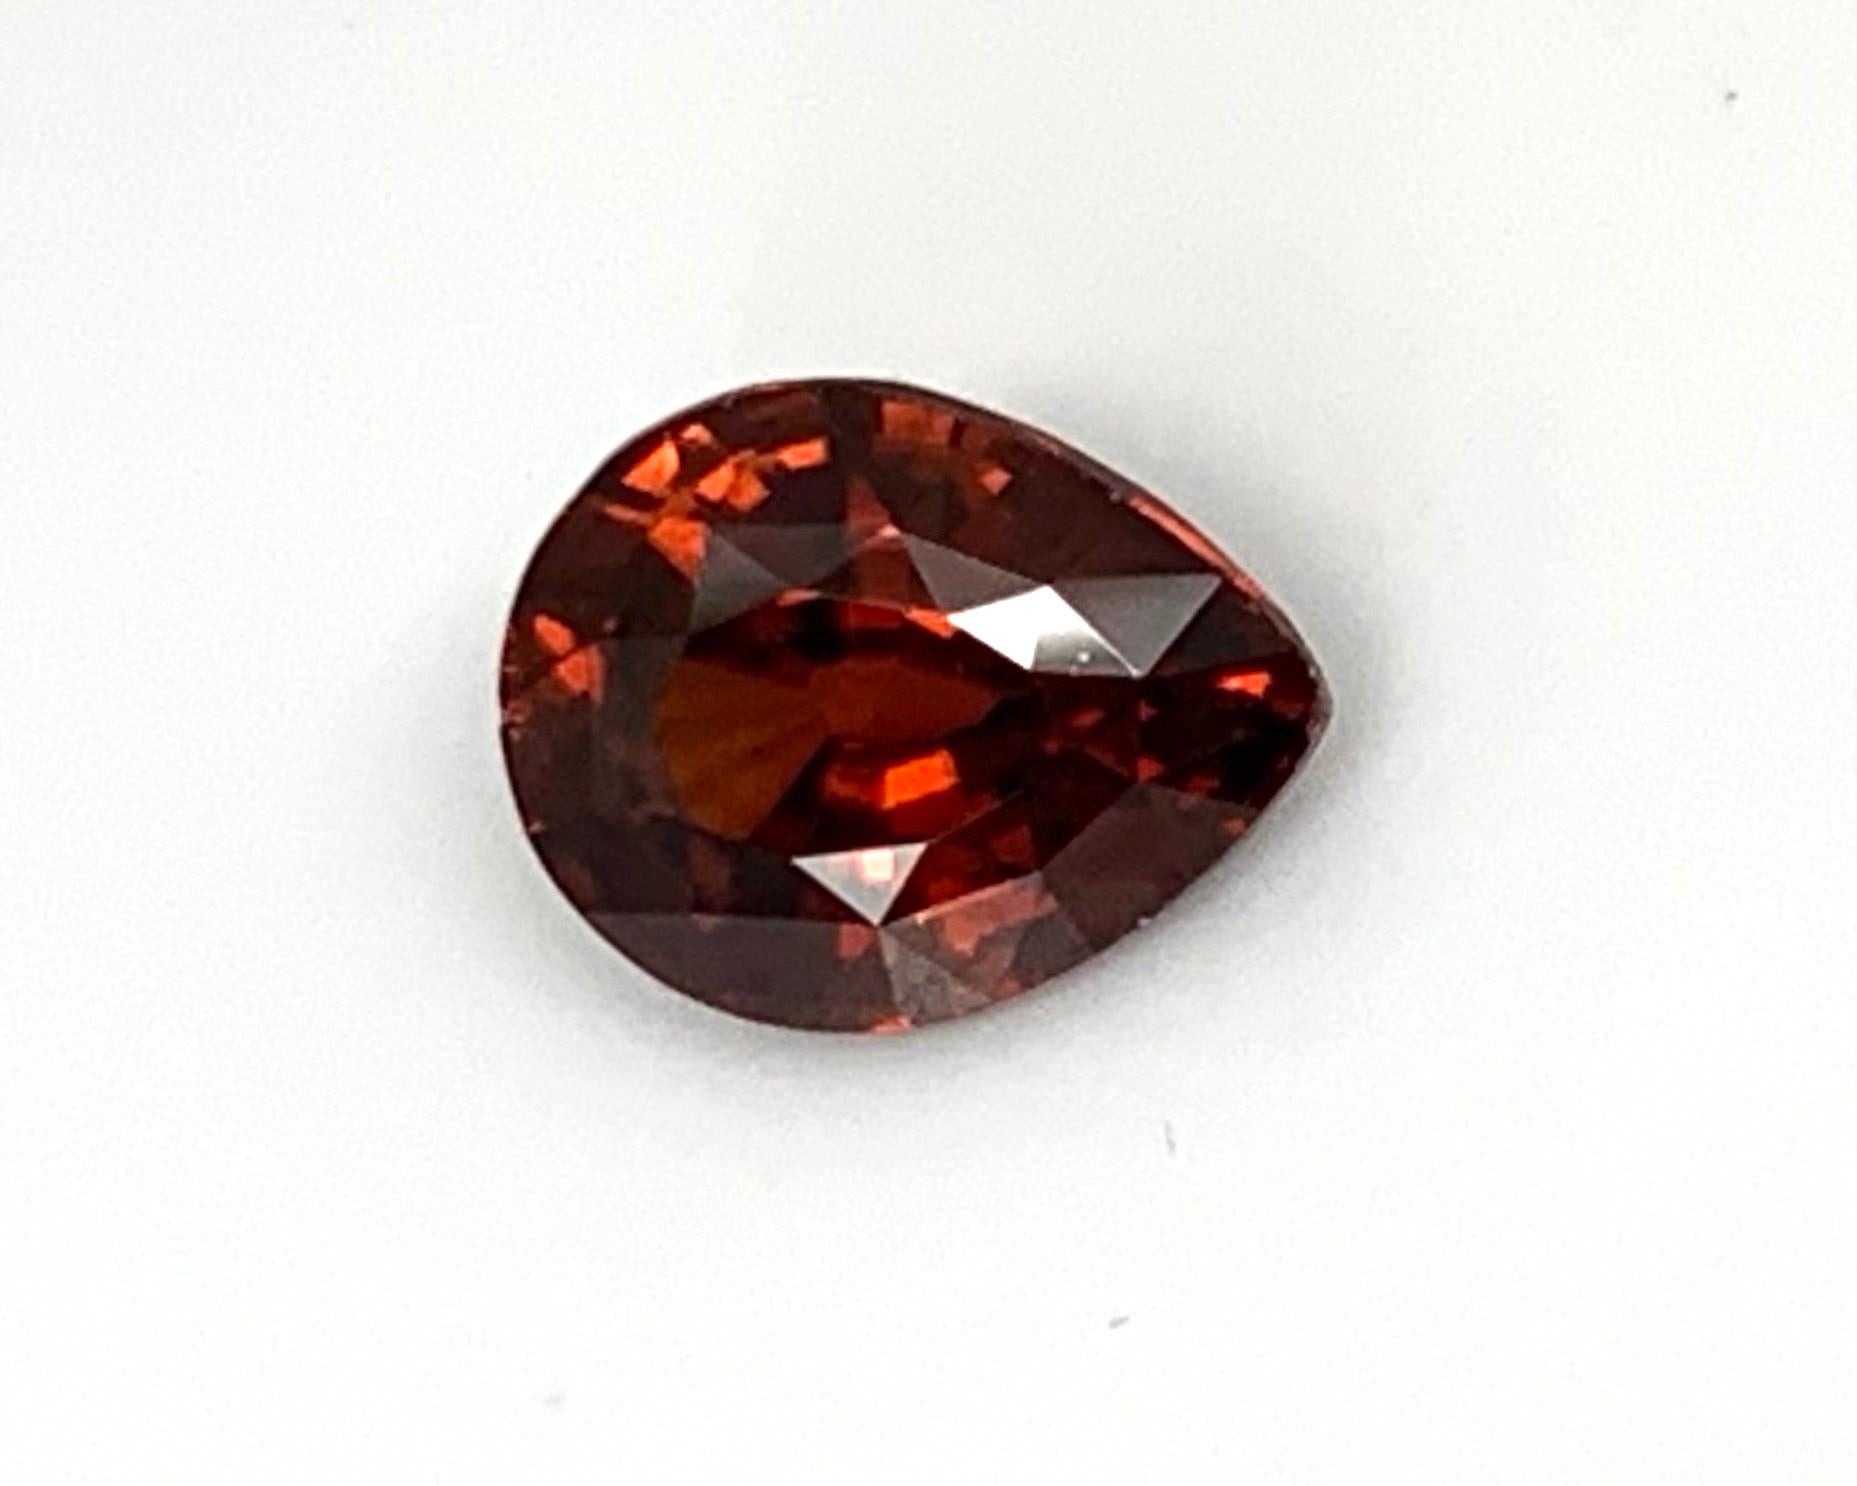 This lovely pear shaped zircon is perfectly shaped and has a strong, reddish orange color. Zircon is more commonly recognized for its bright blue shades, but this December birthstone occurs in a rainbow of colors, including rich earth tones. Prized